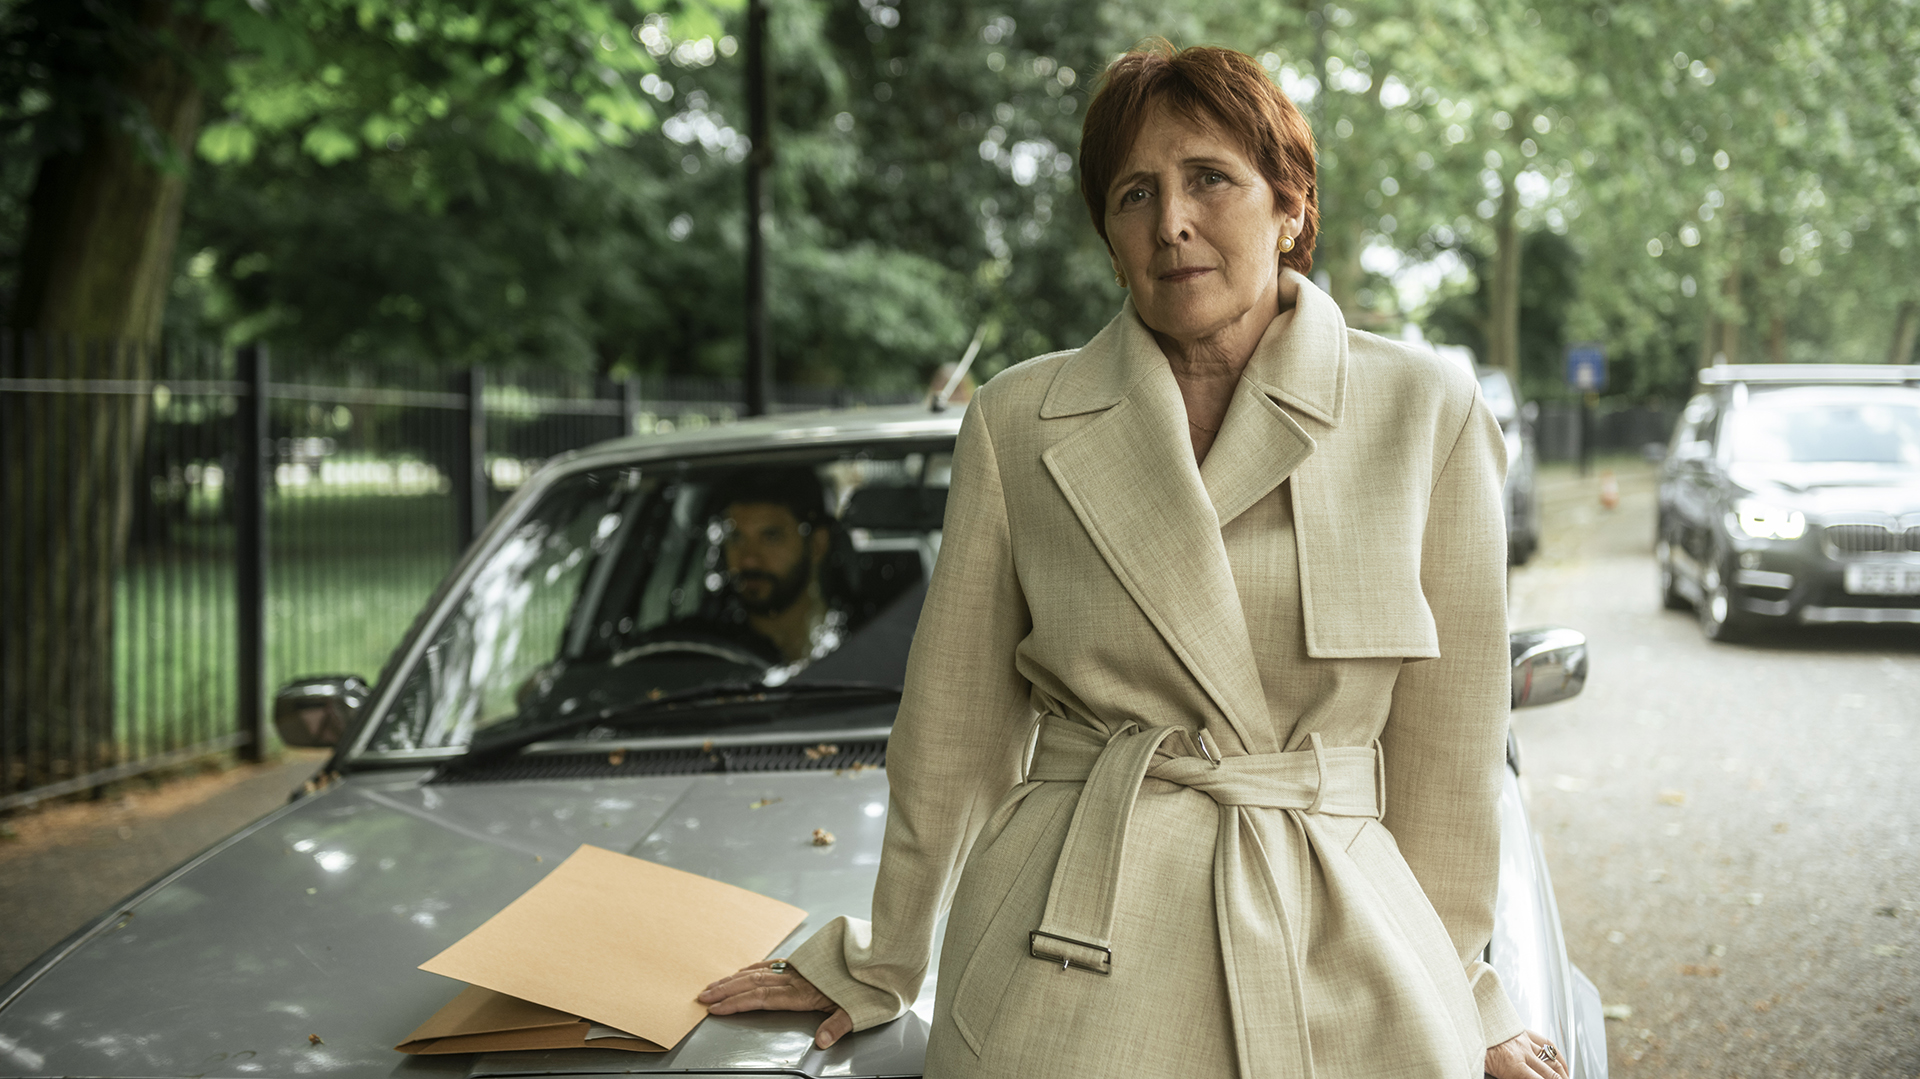 Play-By-Play of ‘Killing Eve’ Season 4, Ep. 2: Eve Is Set on Finding Hélène, Carolyn Wants Back In the Spy Game, Villanelle Seeks Friendship